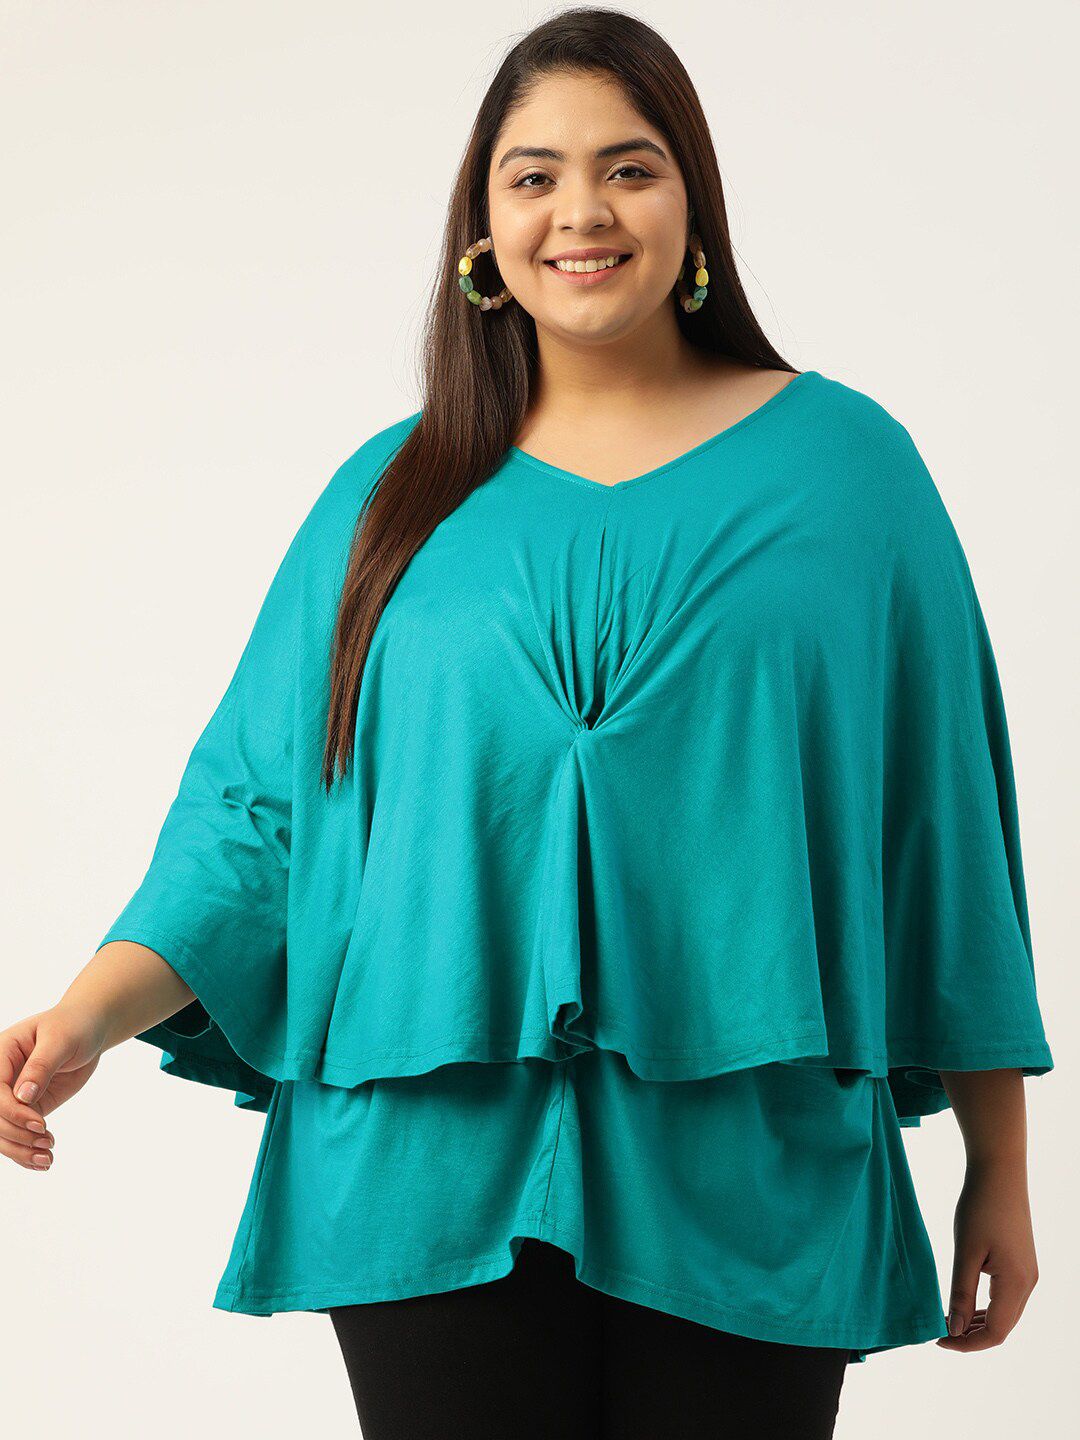 theRebelinme Plus Size Turquoise Blue Layered Cape Top Price in India